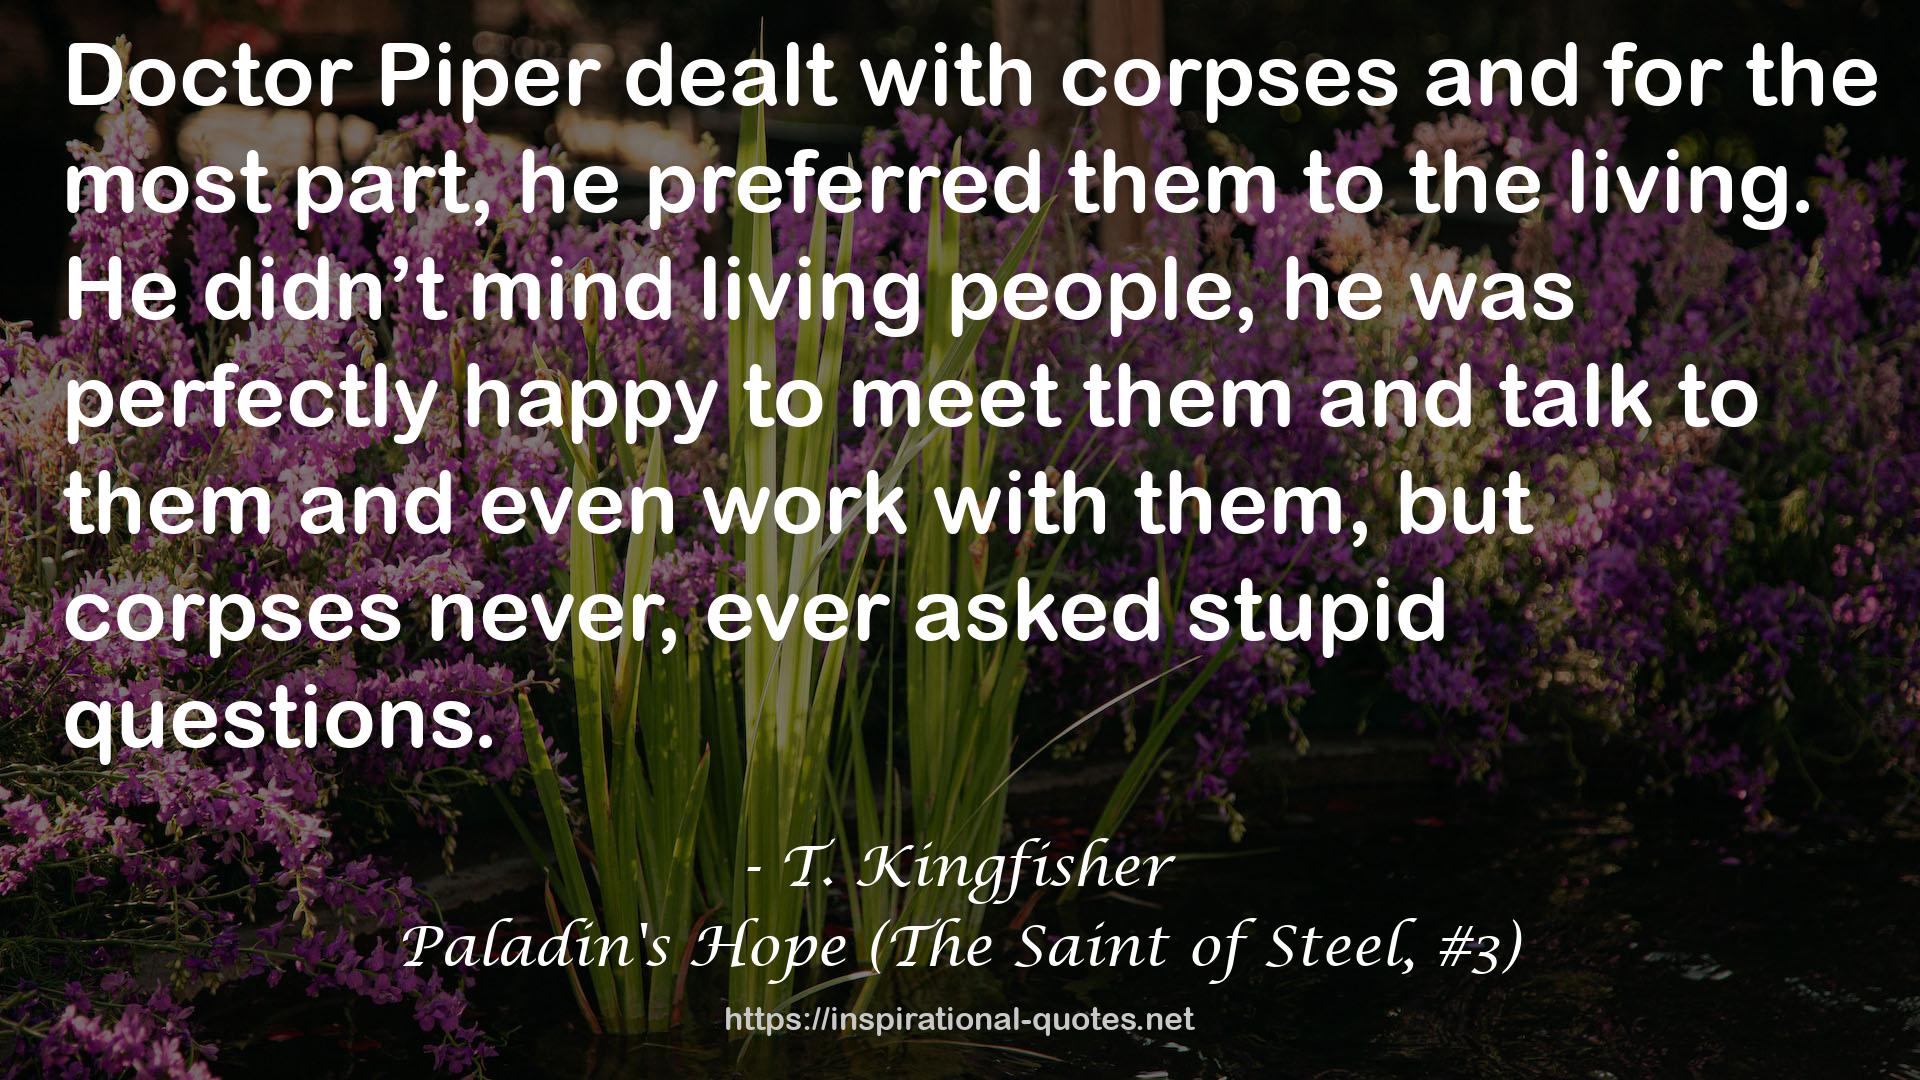 Paladin's Hope (The Saint of Steel, #3) QUOTES